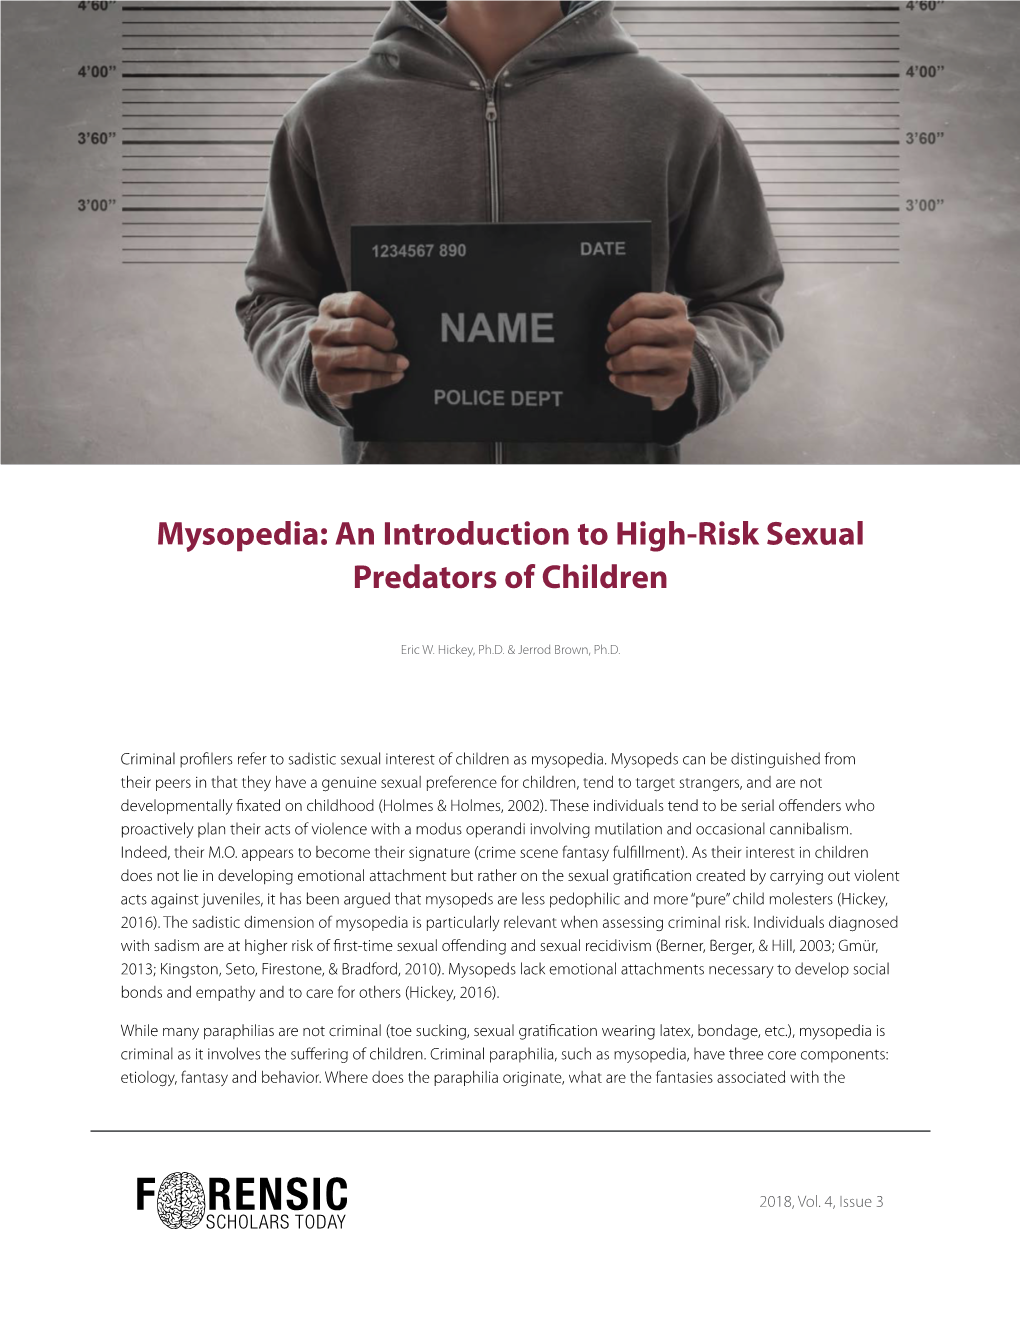 Mysopedia: an Introduction to High-Risk Sexual Predators of Children